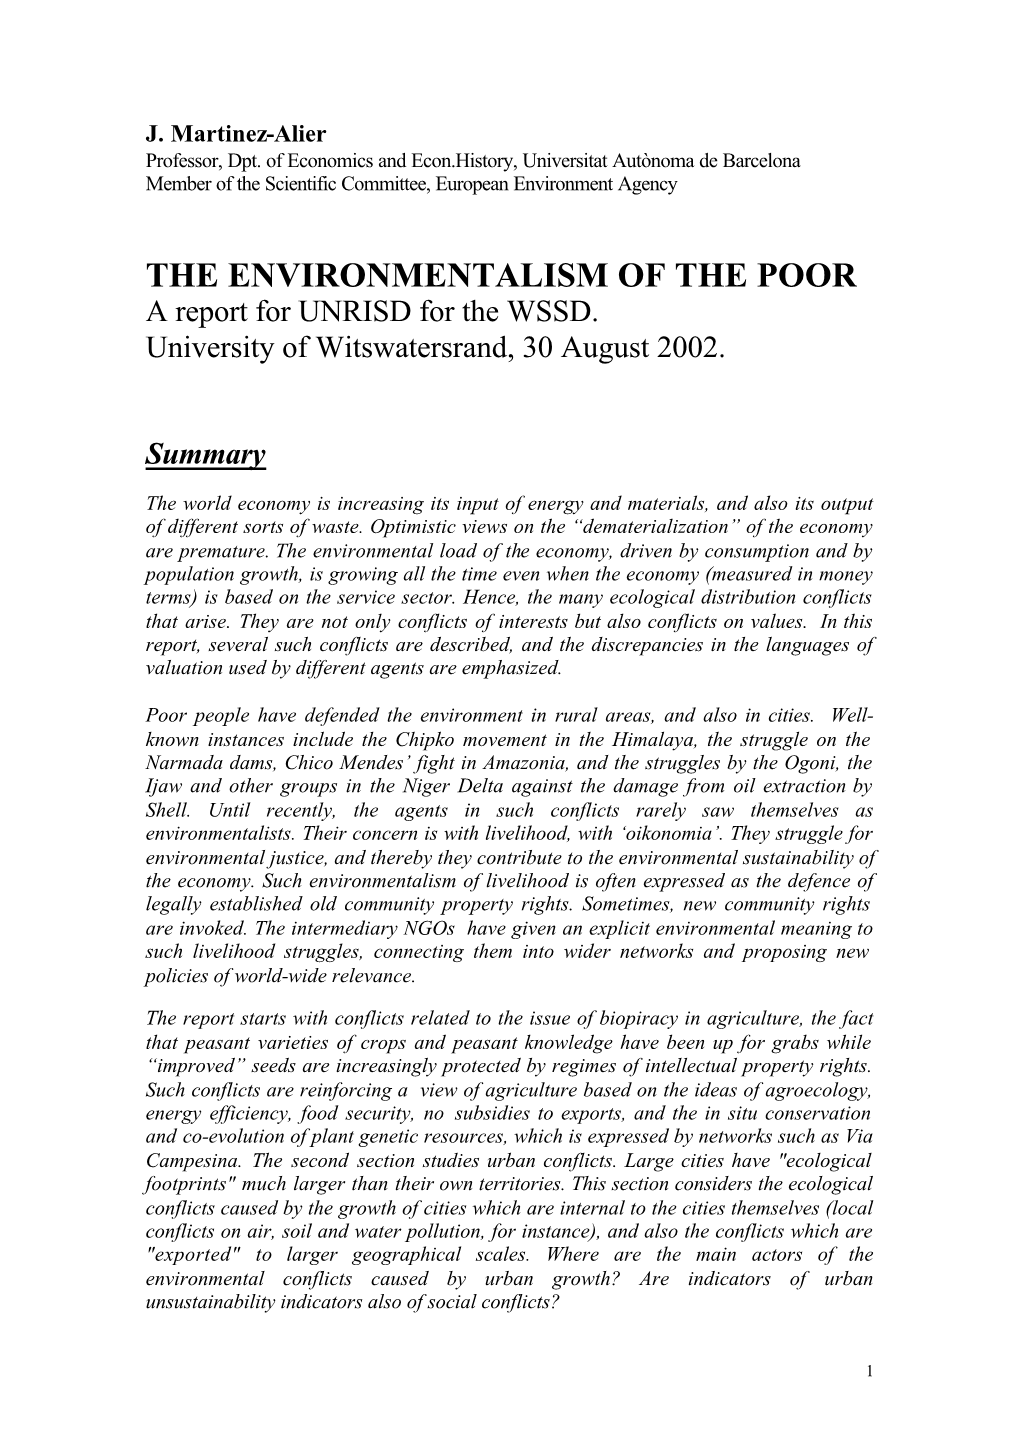 THE ENVIRONMENTALISM of the POOR a Report for UNRISD for the WSSD